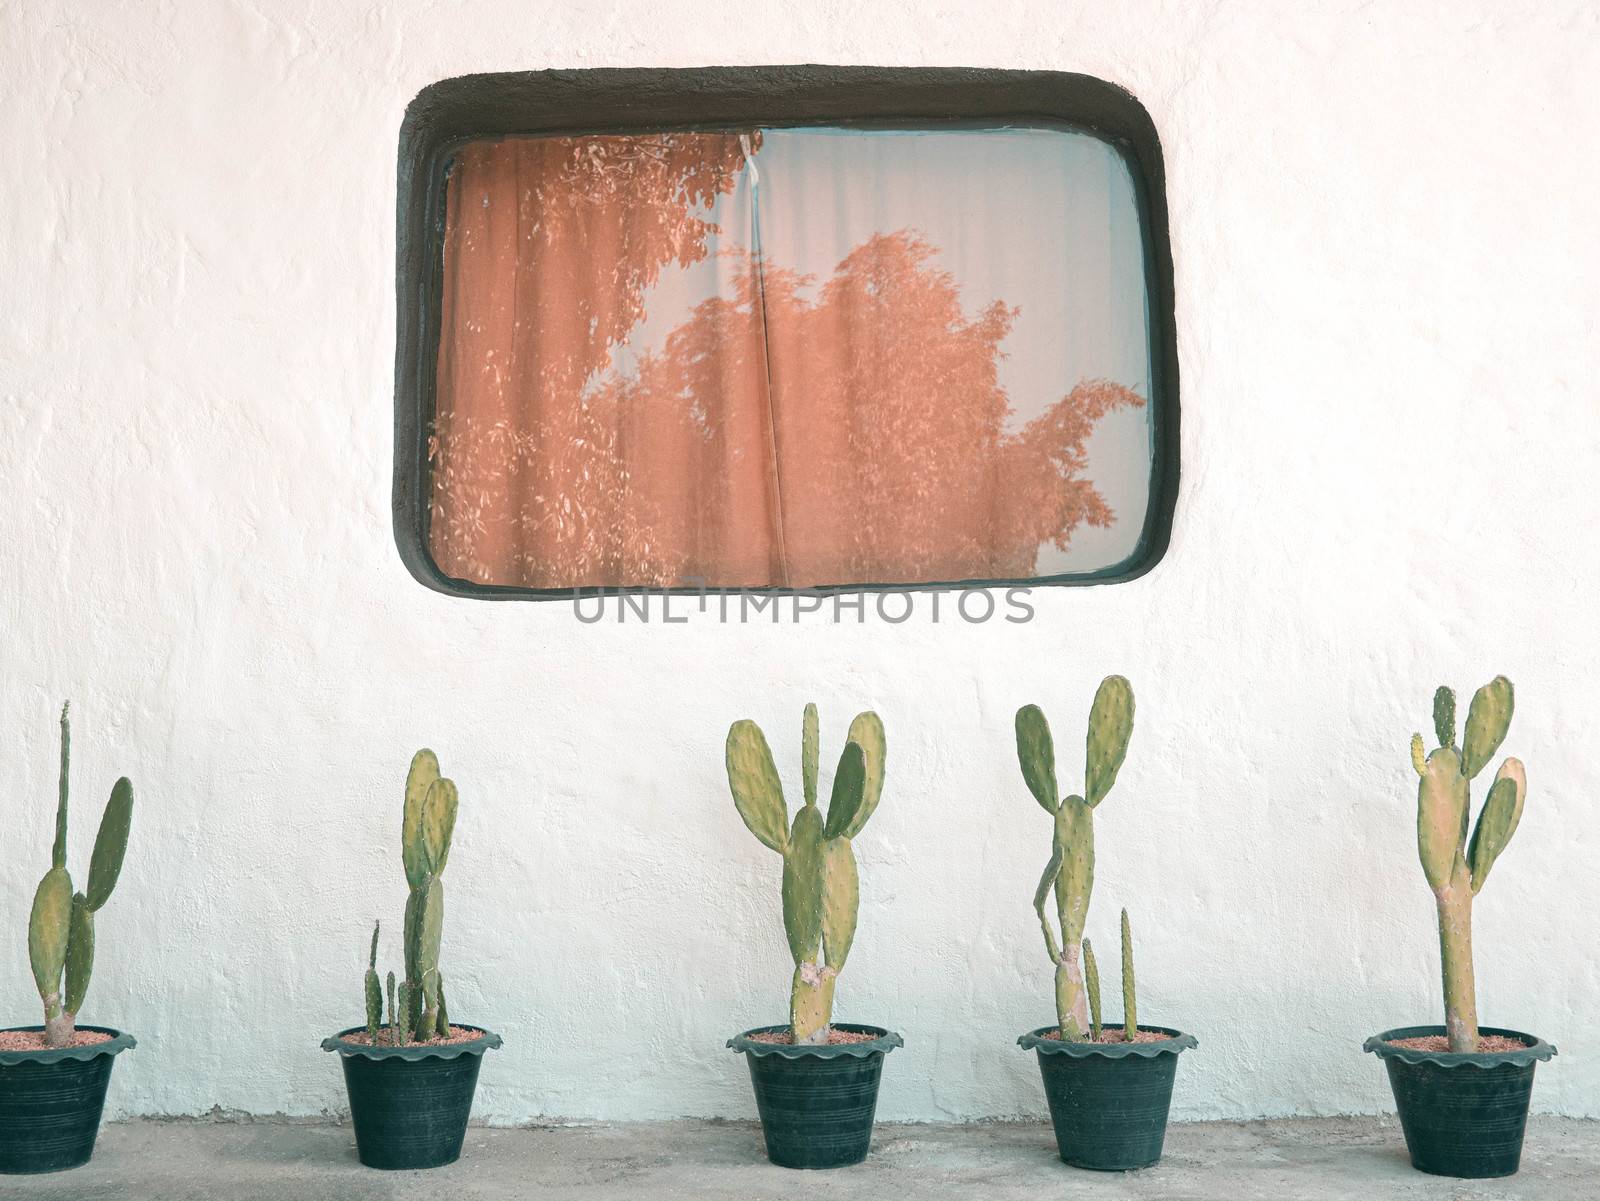 Cactus in a black plastic pot arranged next to the Earthen house, painted in white with the window.